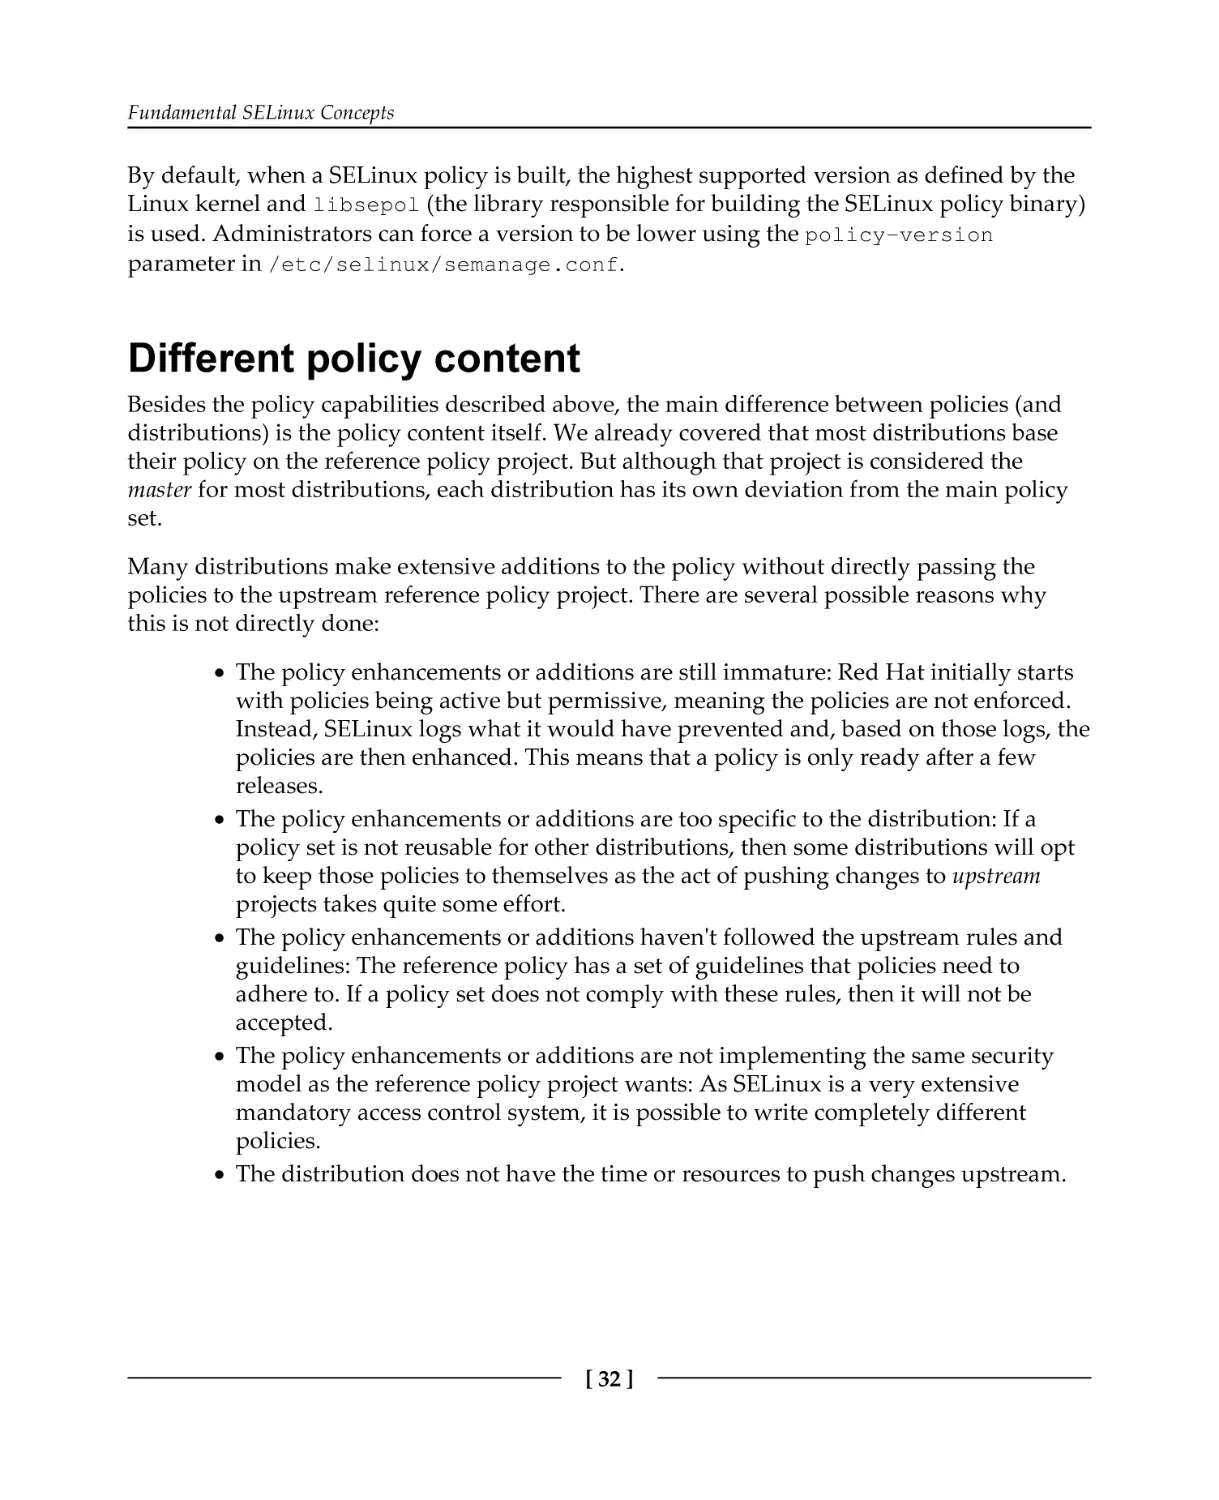 Different policy content